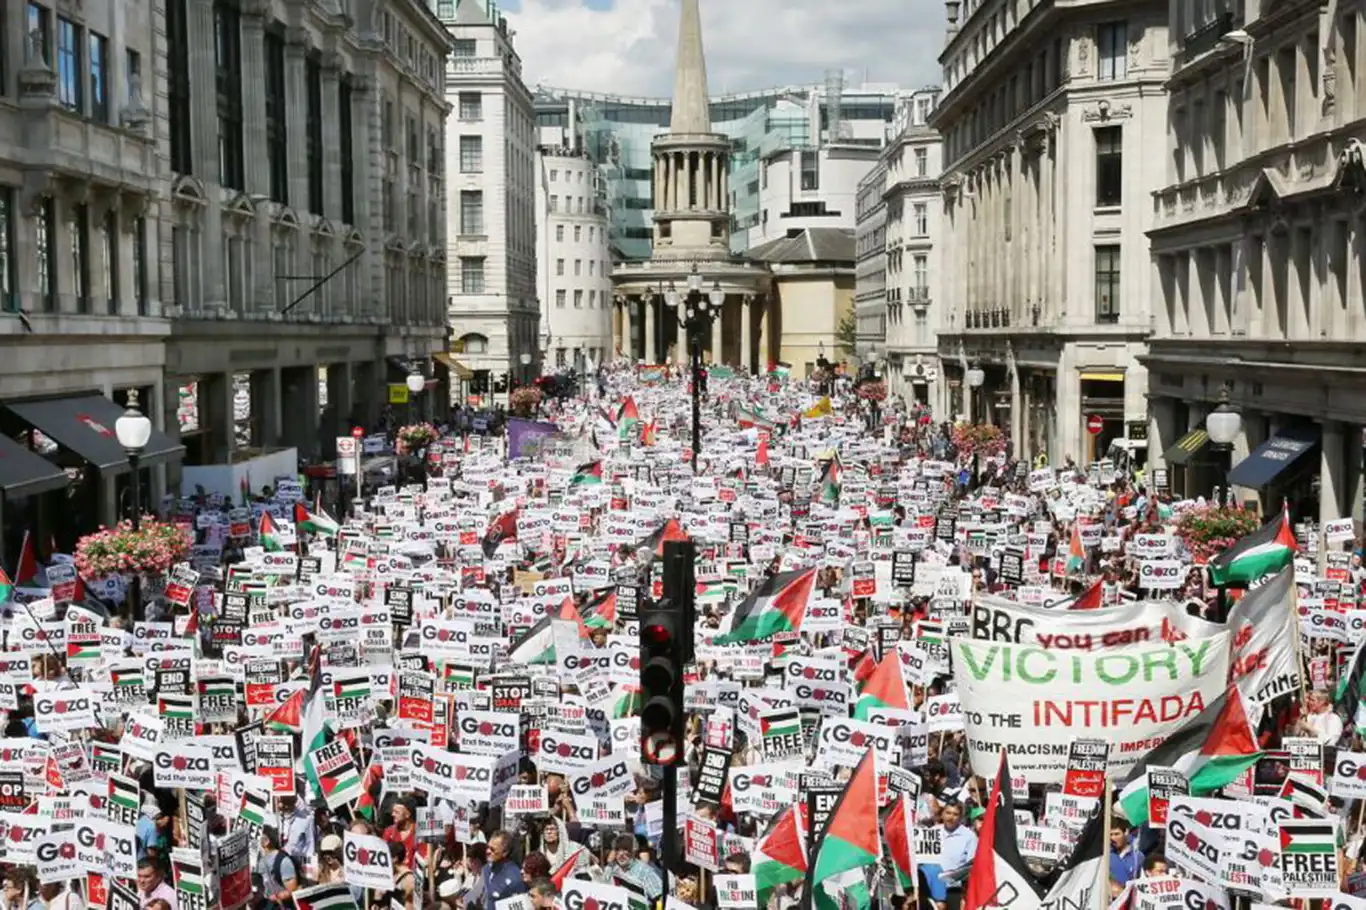 Thousands rally for Palestine solidarity in London, demanding ceasefire in Gaza